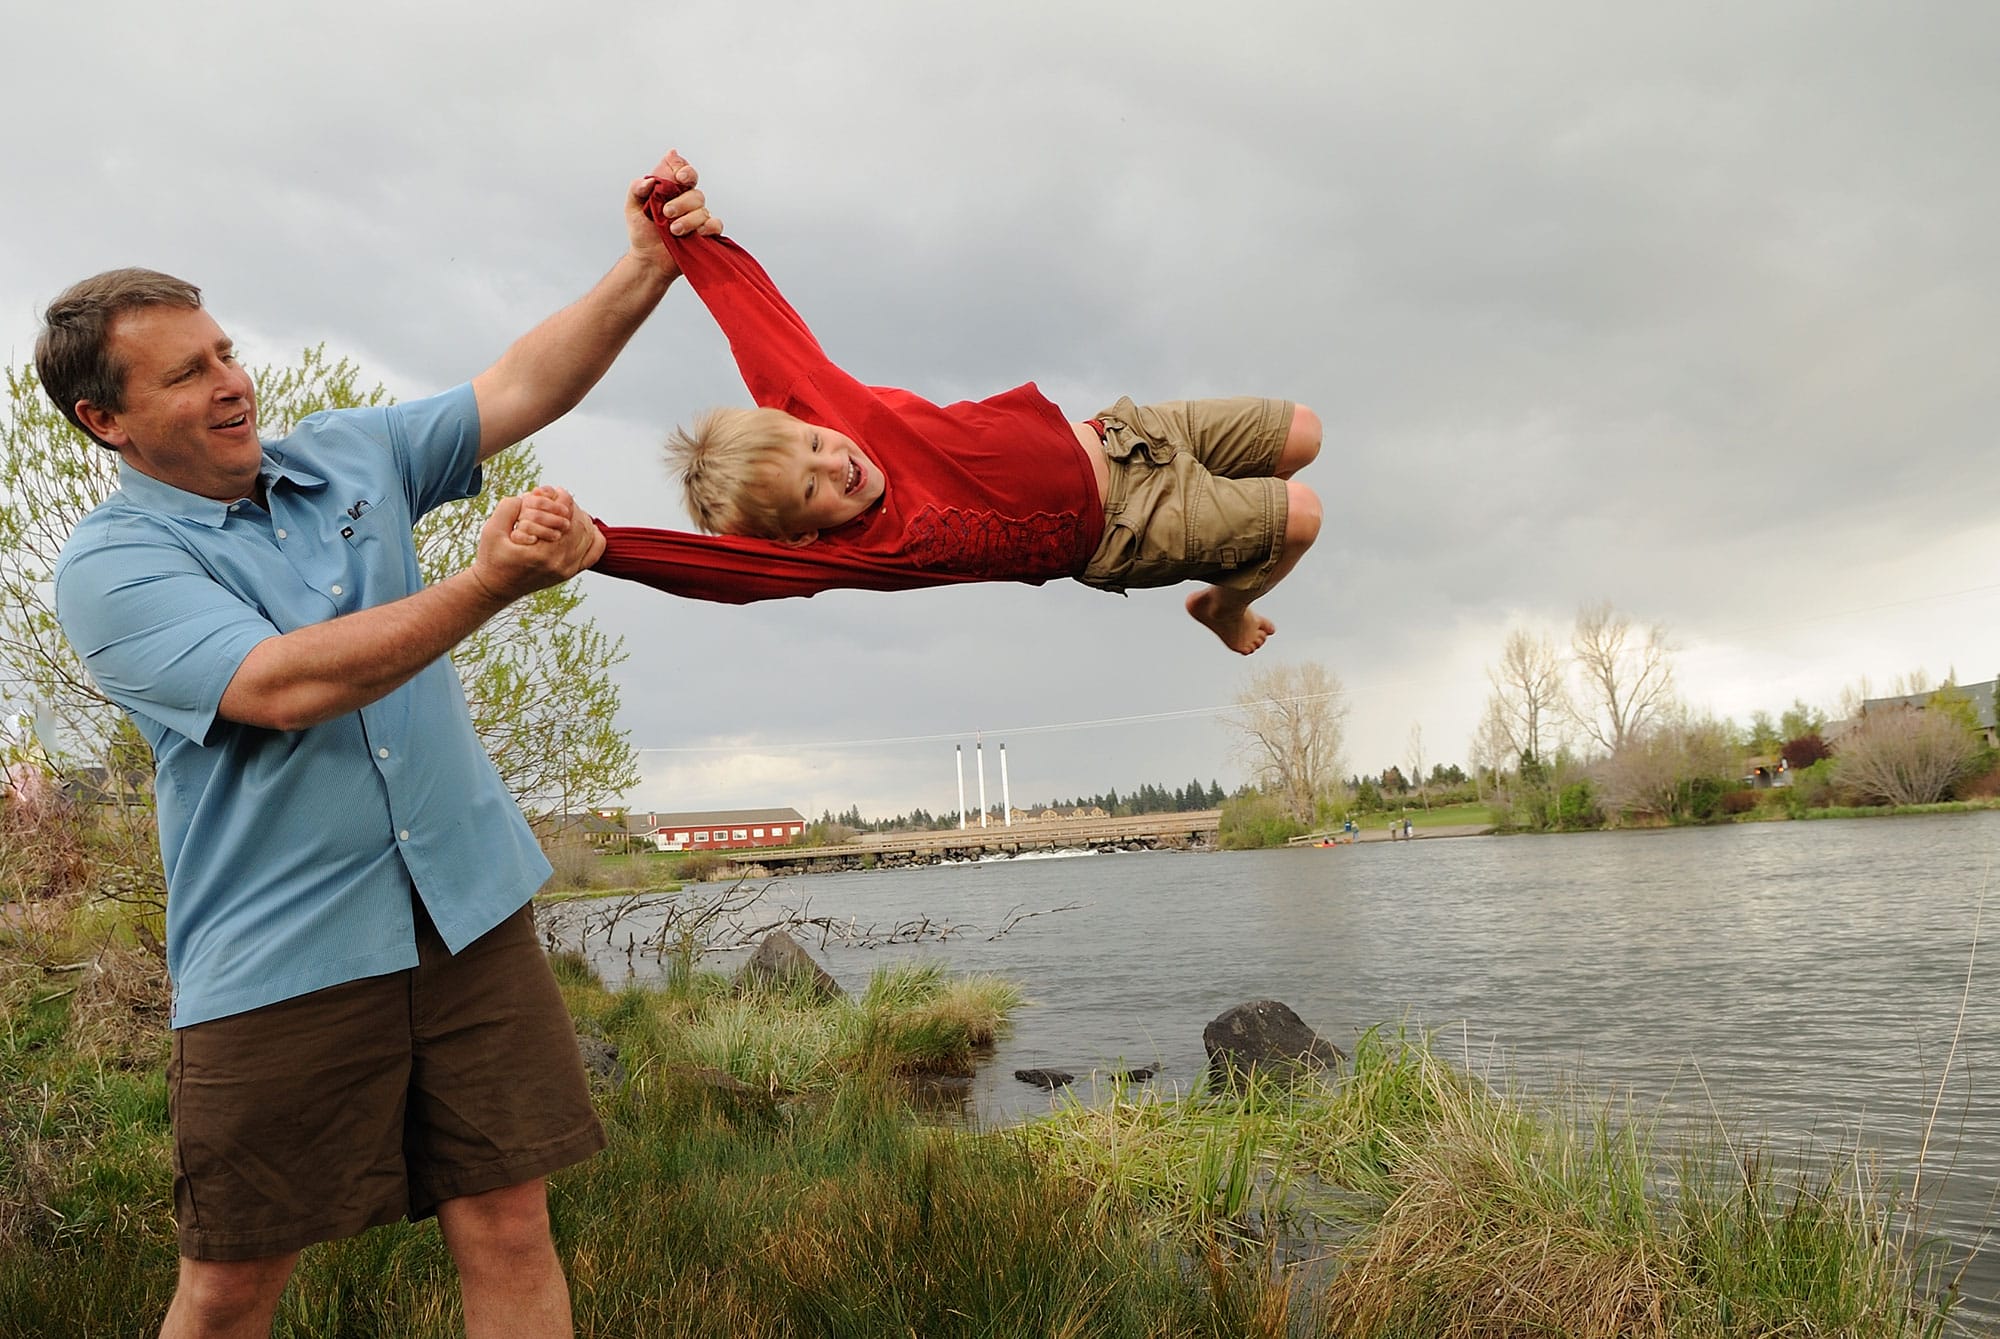 A man and a child in the air near a river.